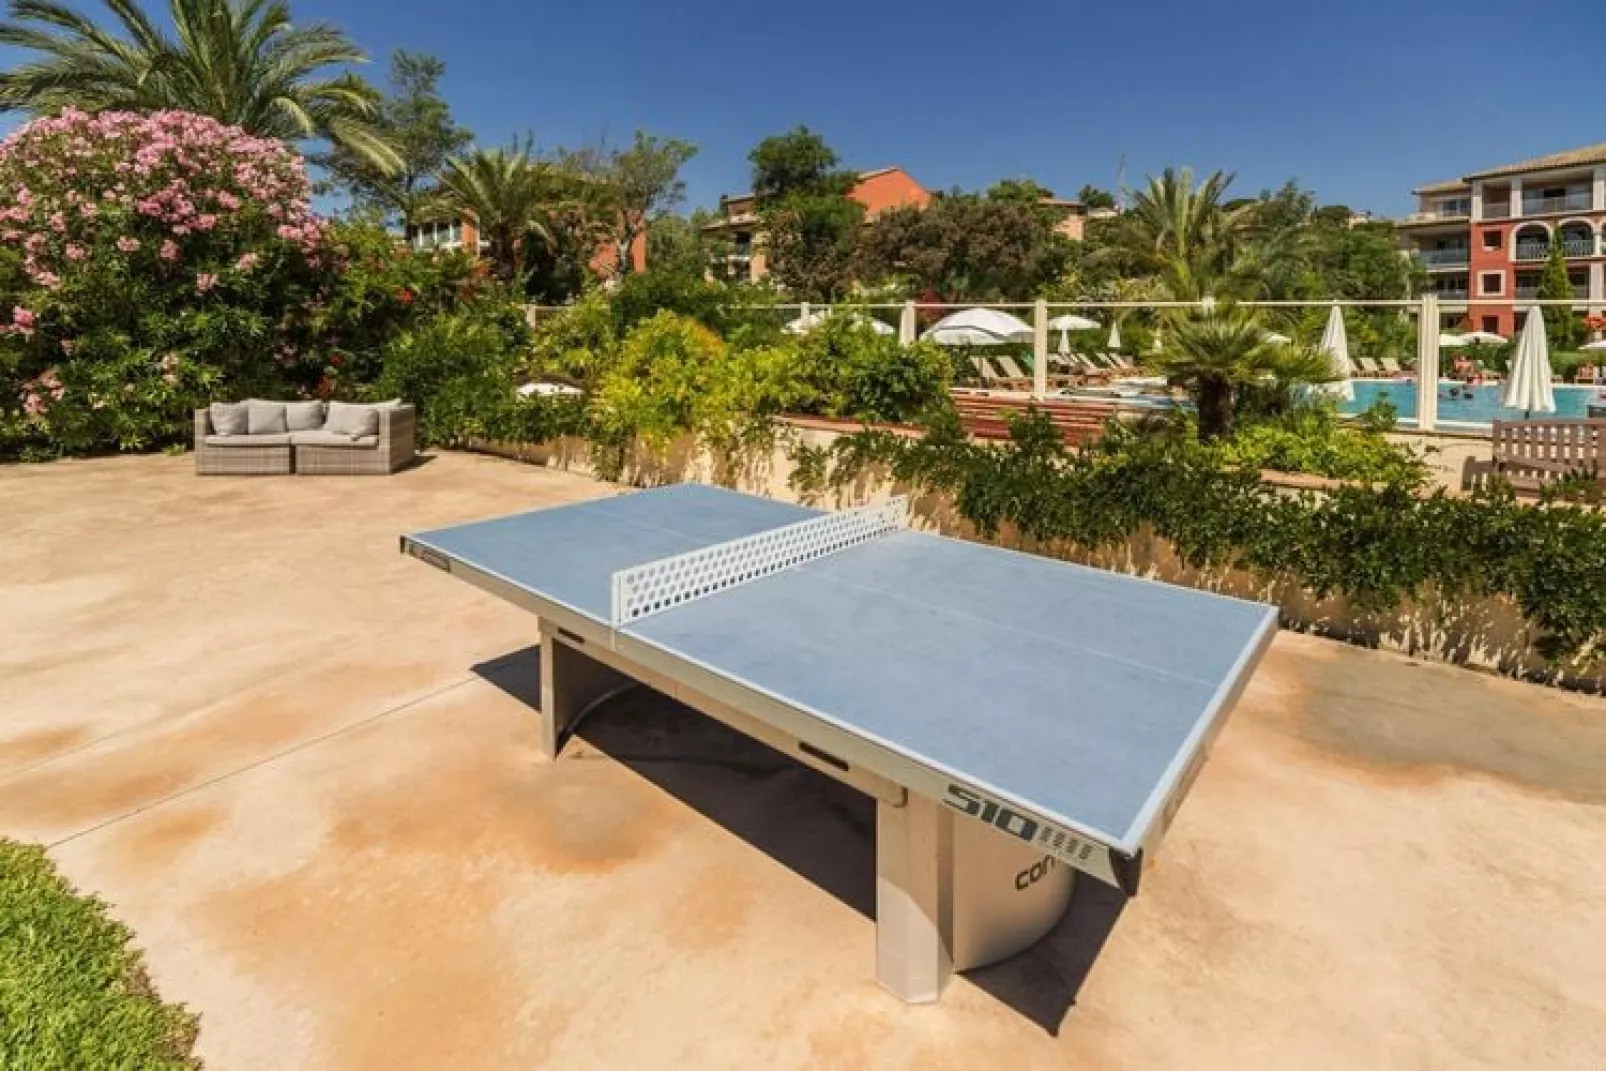 Residence Les Calanques, Les Issambres-14 Standard - Studio 4 p. - 1 sleeping alcove-Parkfaciliteiten